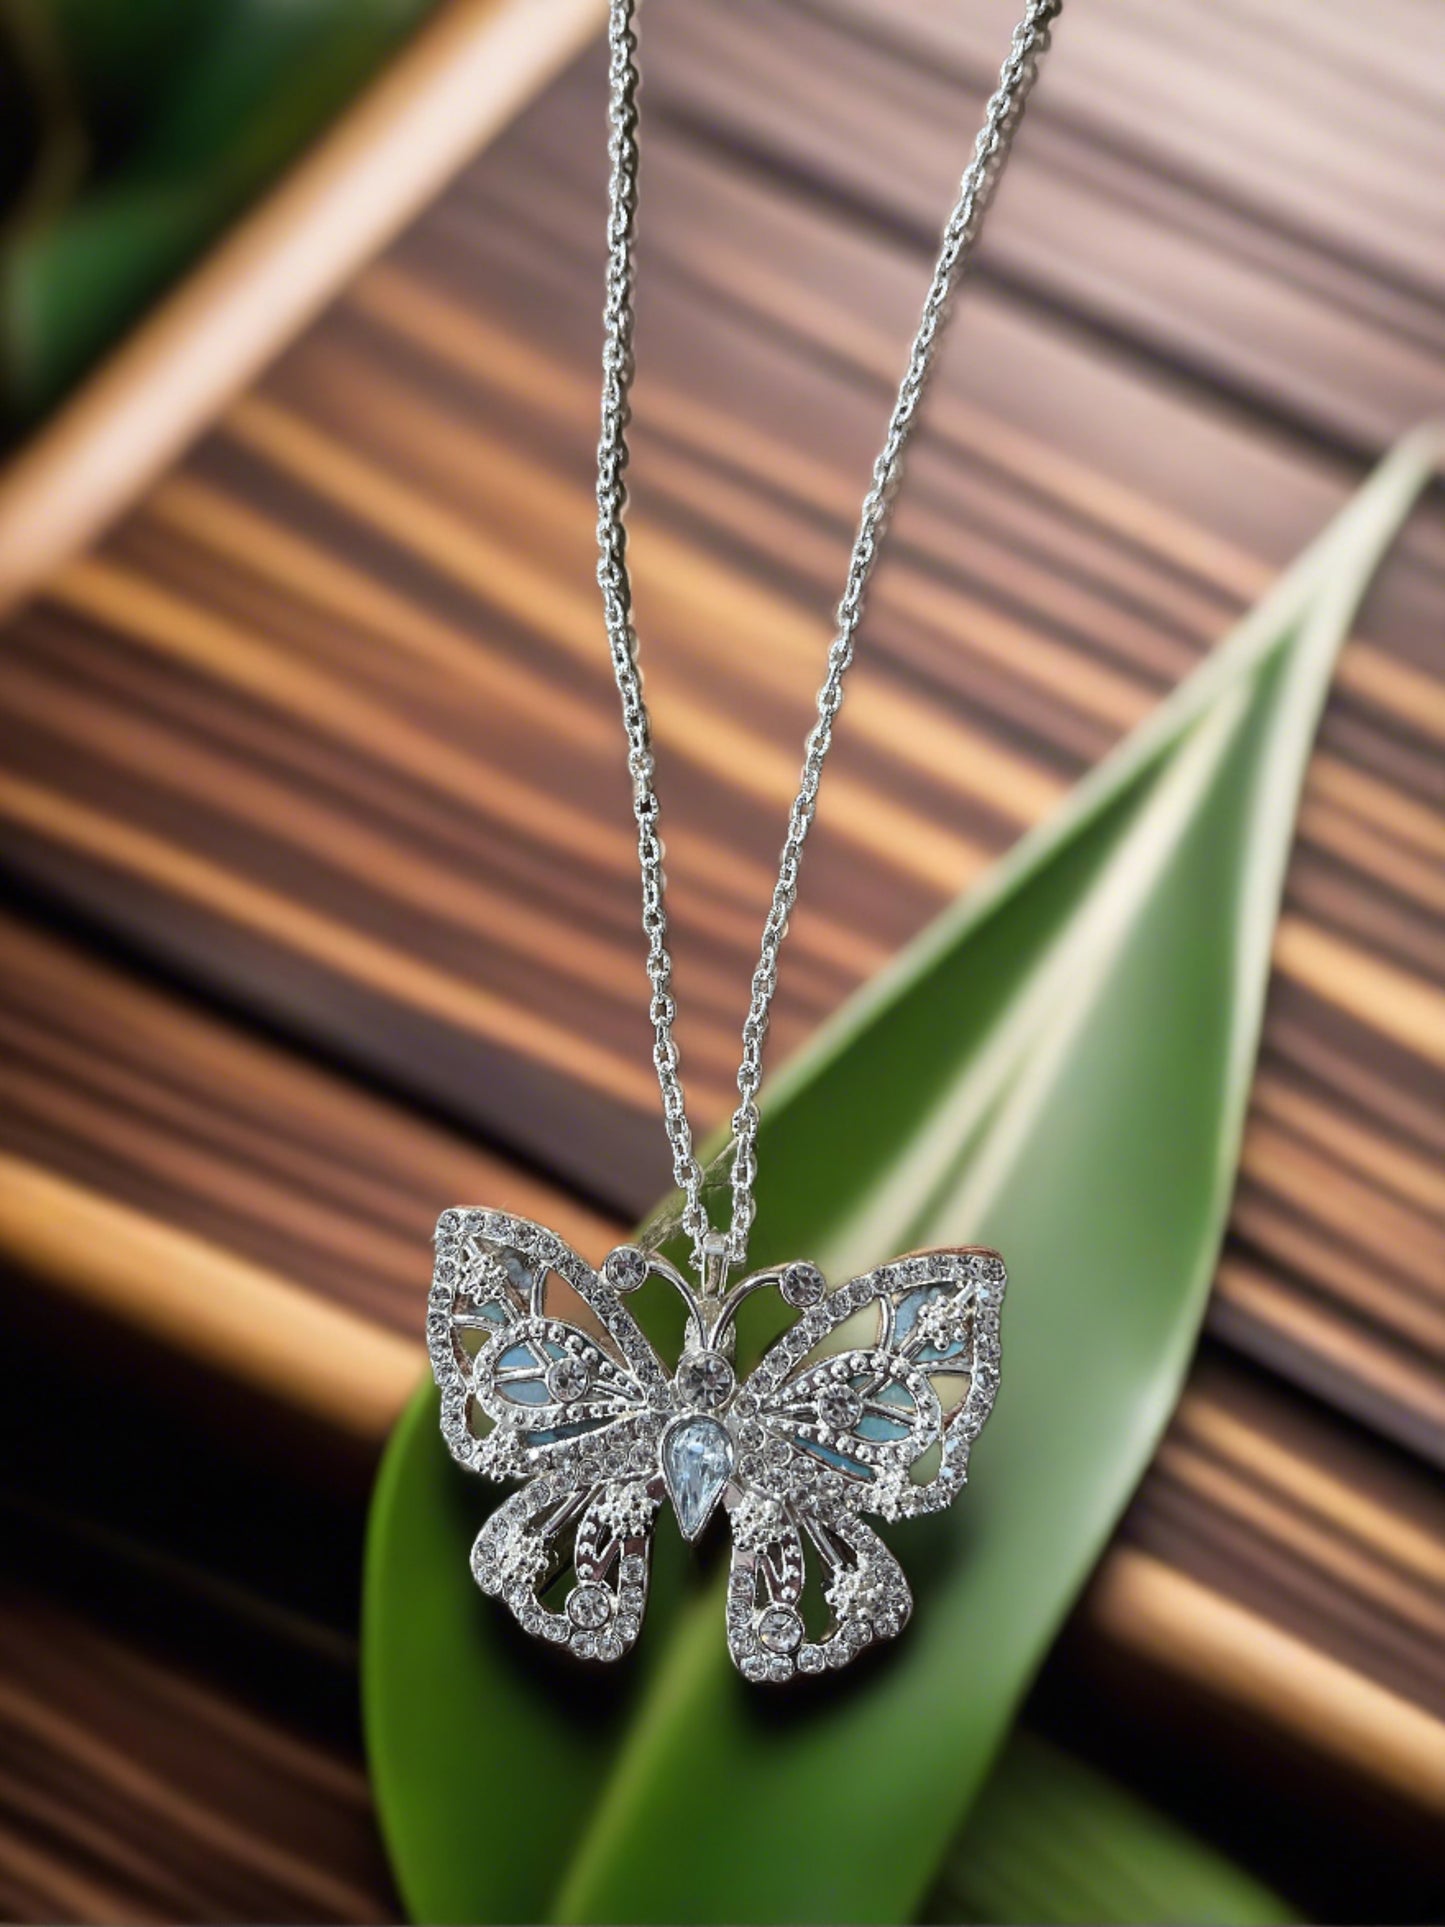 Rhinestone Butterfly Pendant on a Silver chain Necklace